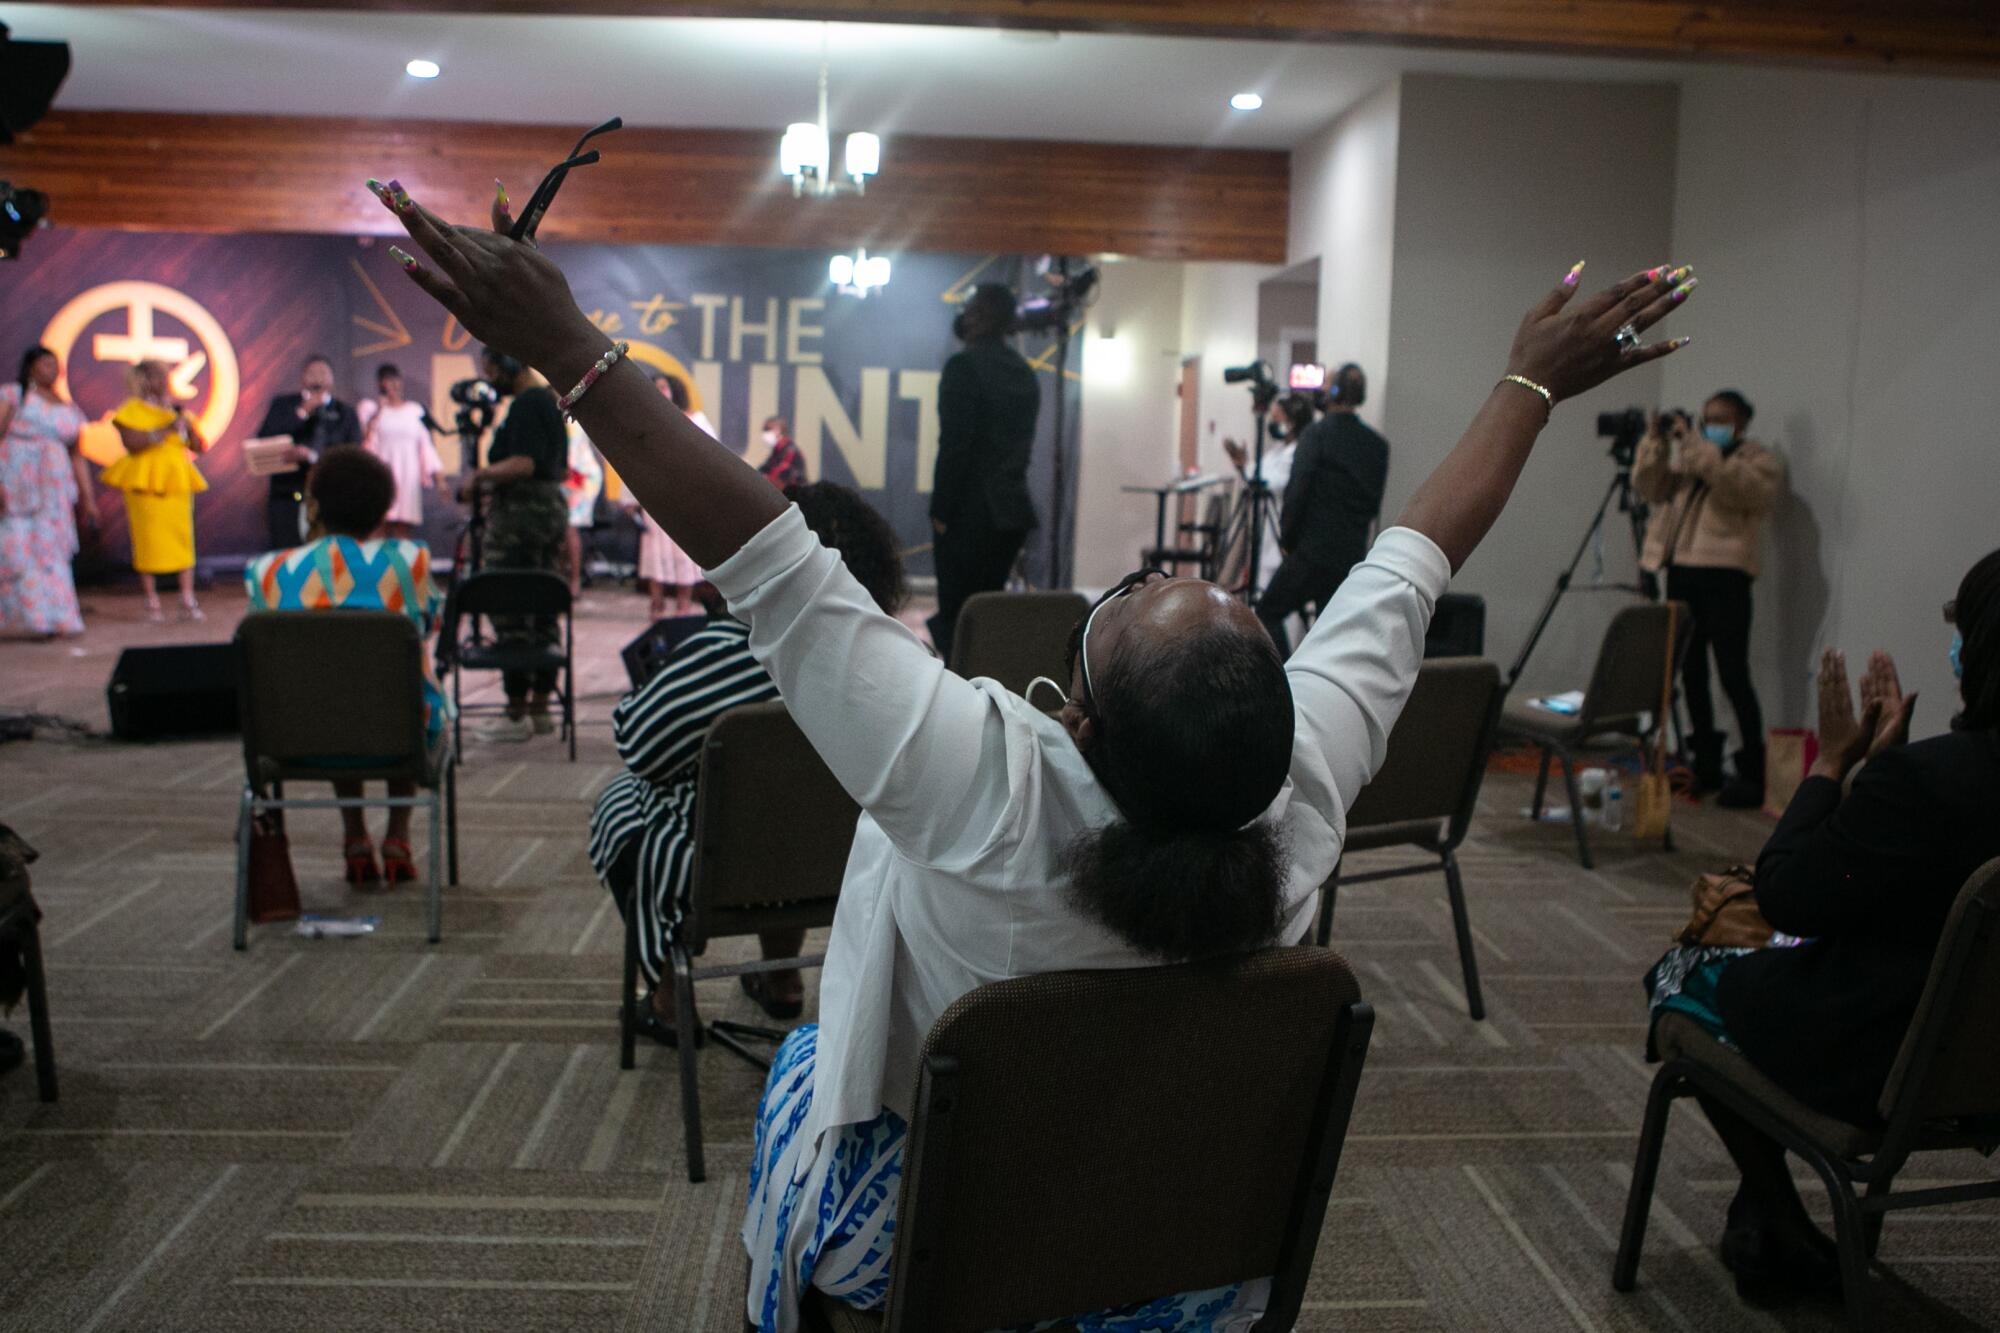 A church member raises her hands during Easter service.